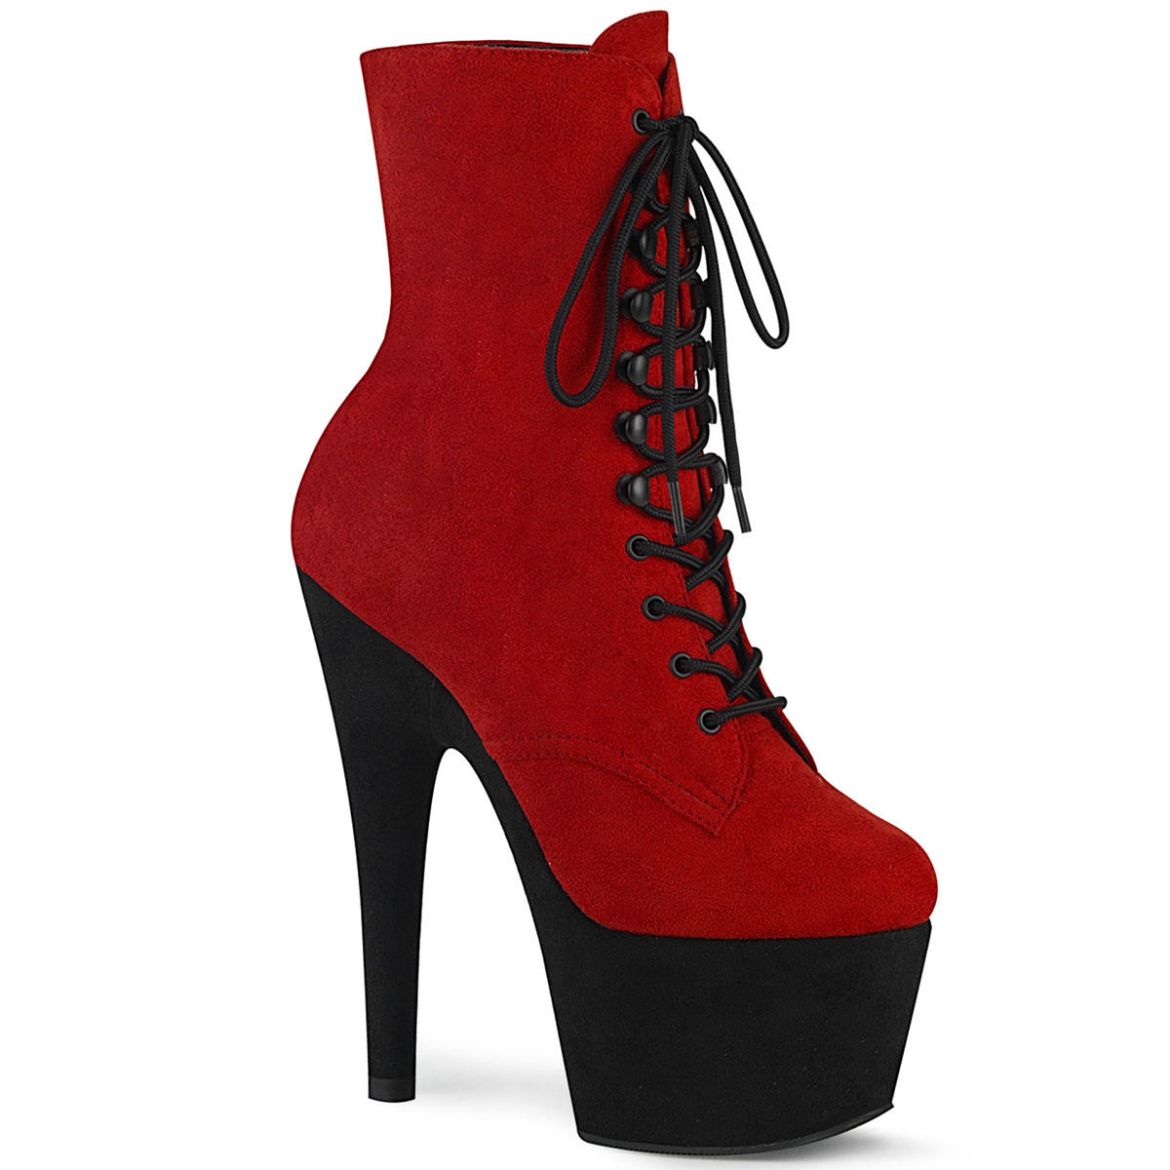 Product image of Pleaser ADORE-1020FSTT Red Faux Suede/Black Faux Suede 7 inch (17.8 cm) Heel 2 3/4 inch (7 cm) Platform Two Tone Lace-Up Ankle Boot Side Zip